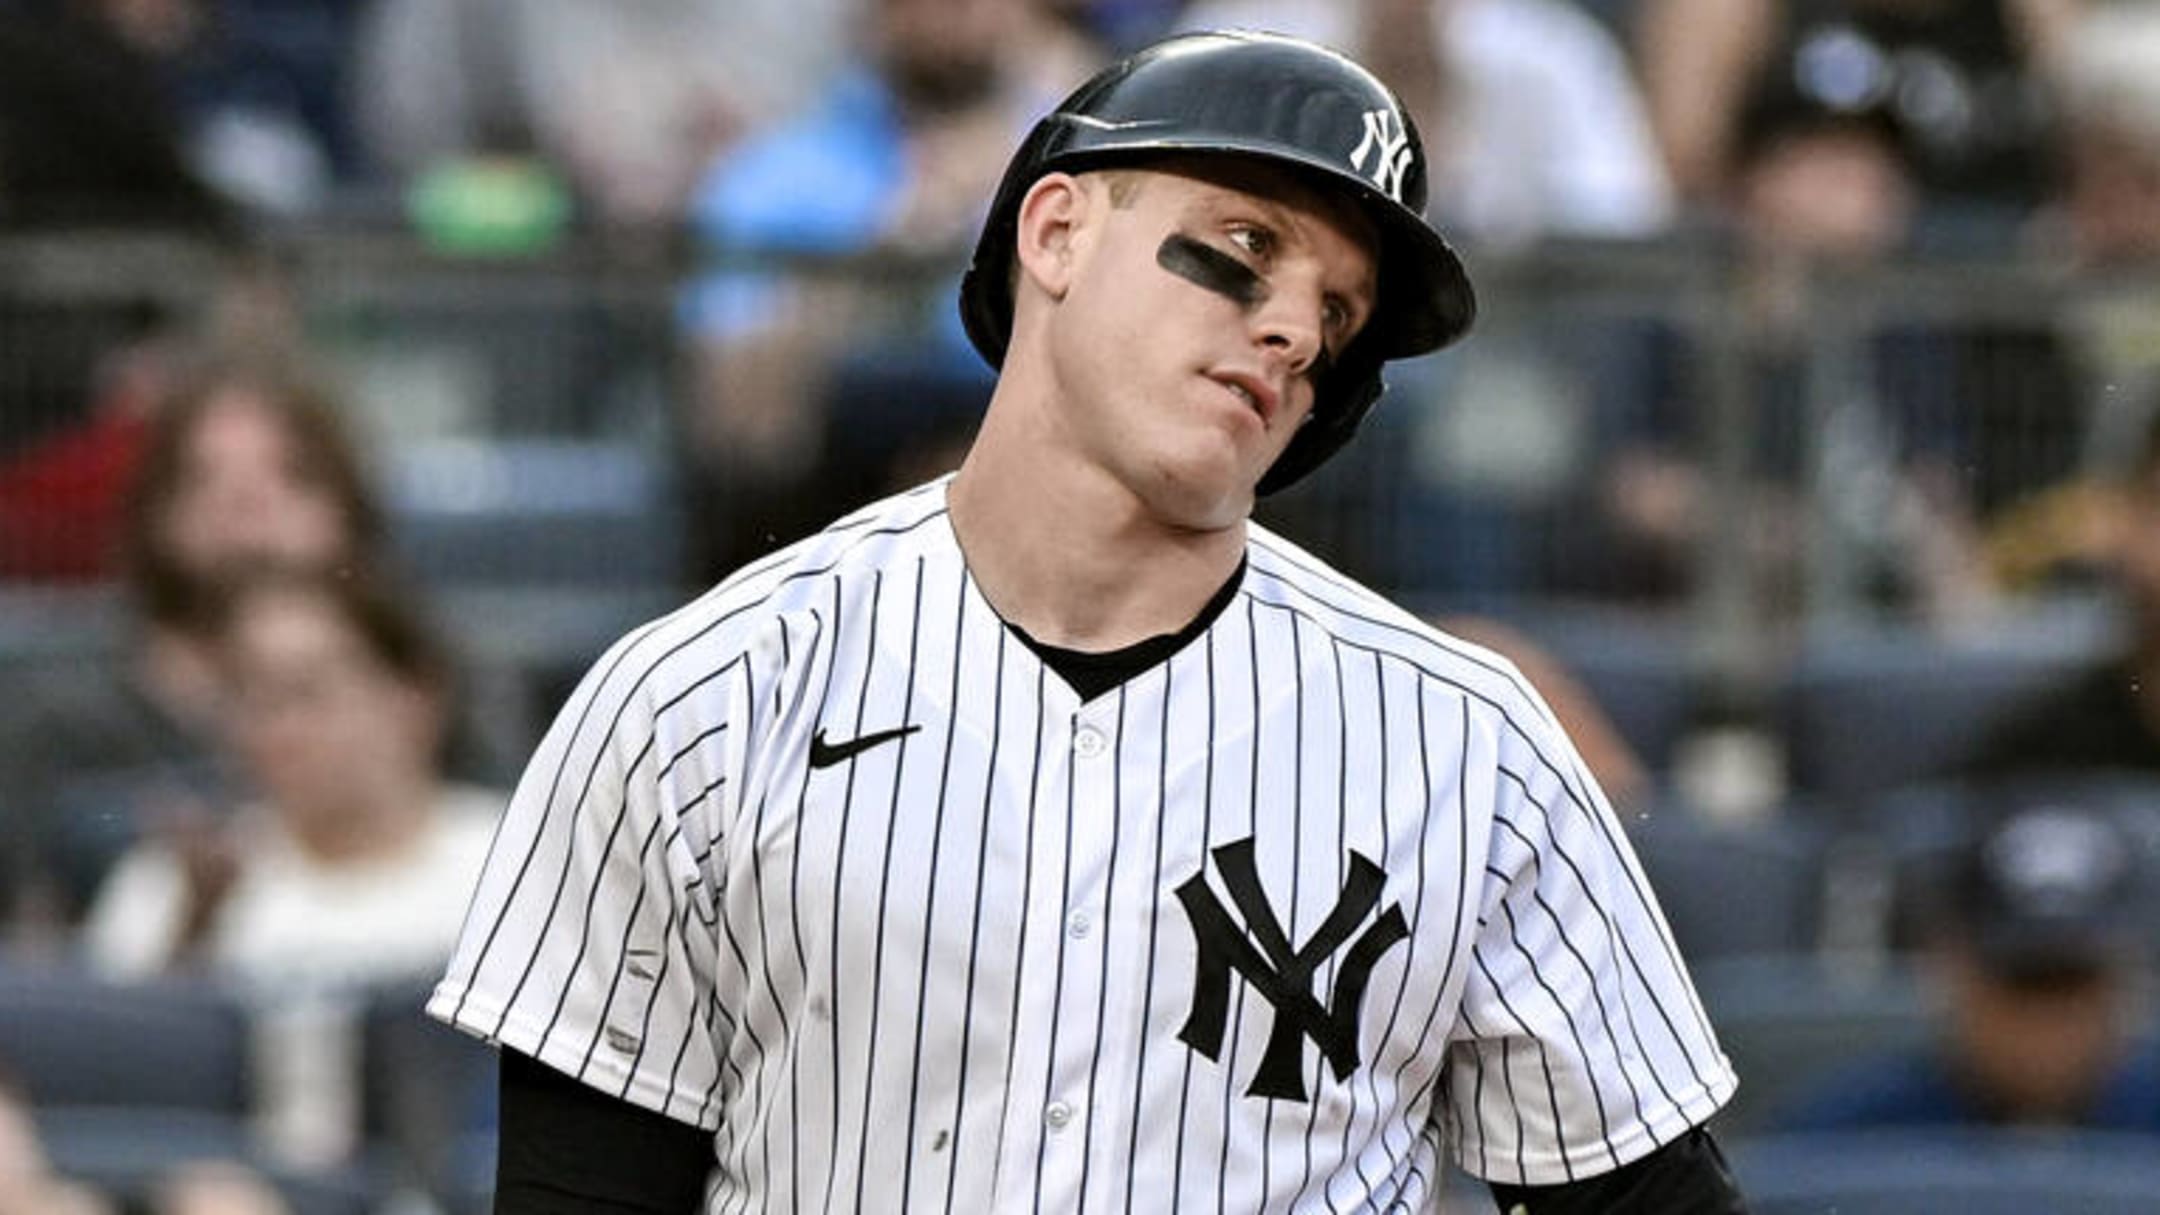 Yankees Videos on X: Harrison Bader was asked about John